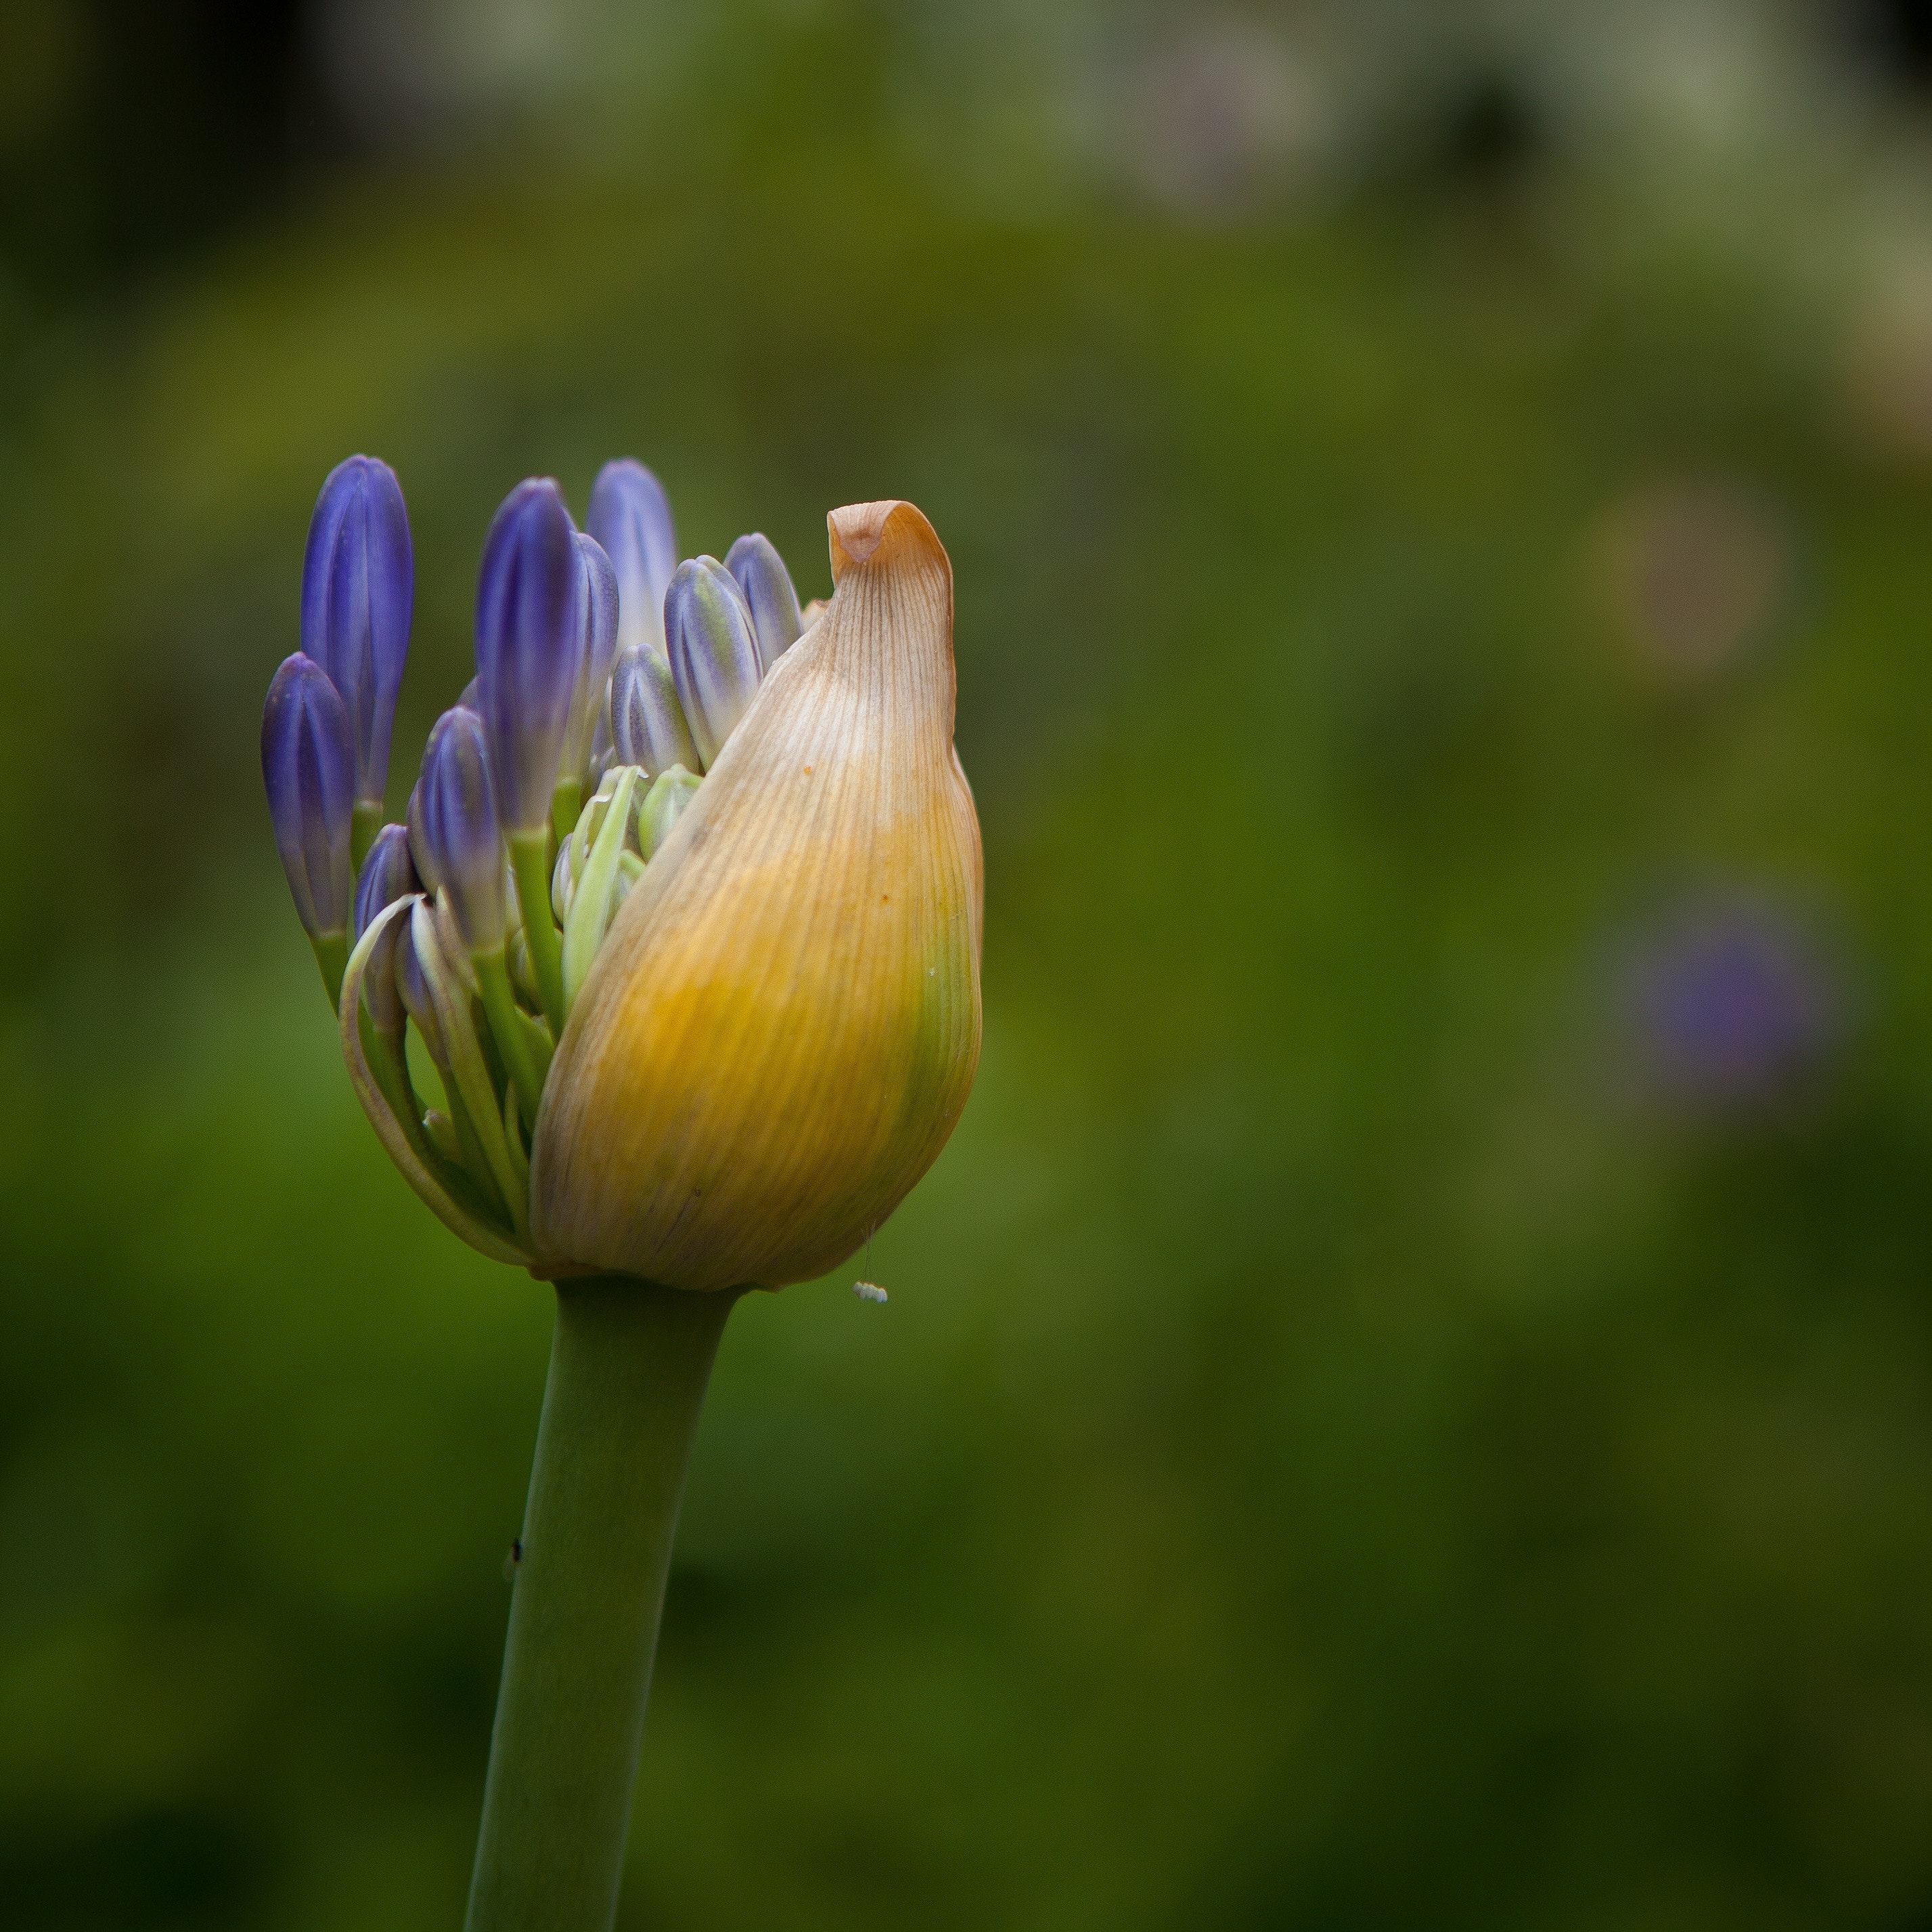 yellow and purple petaled flower